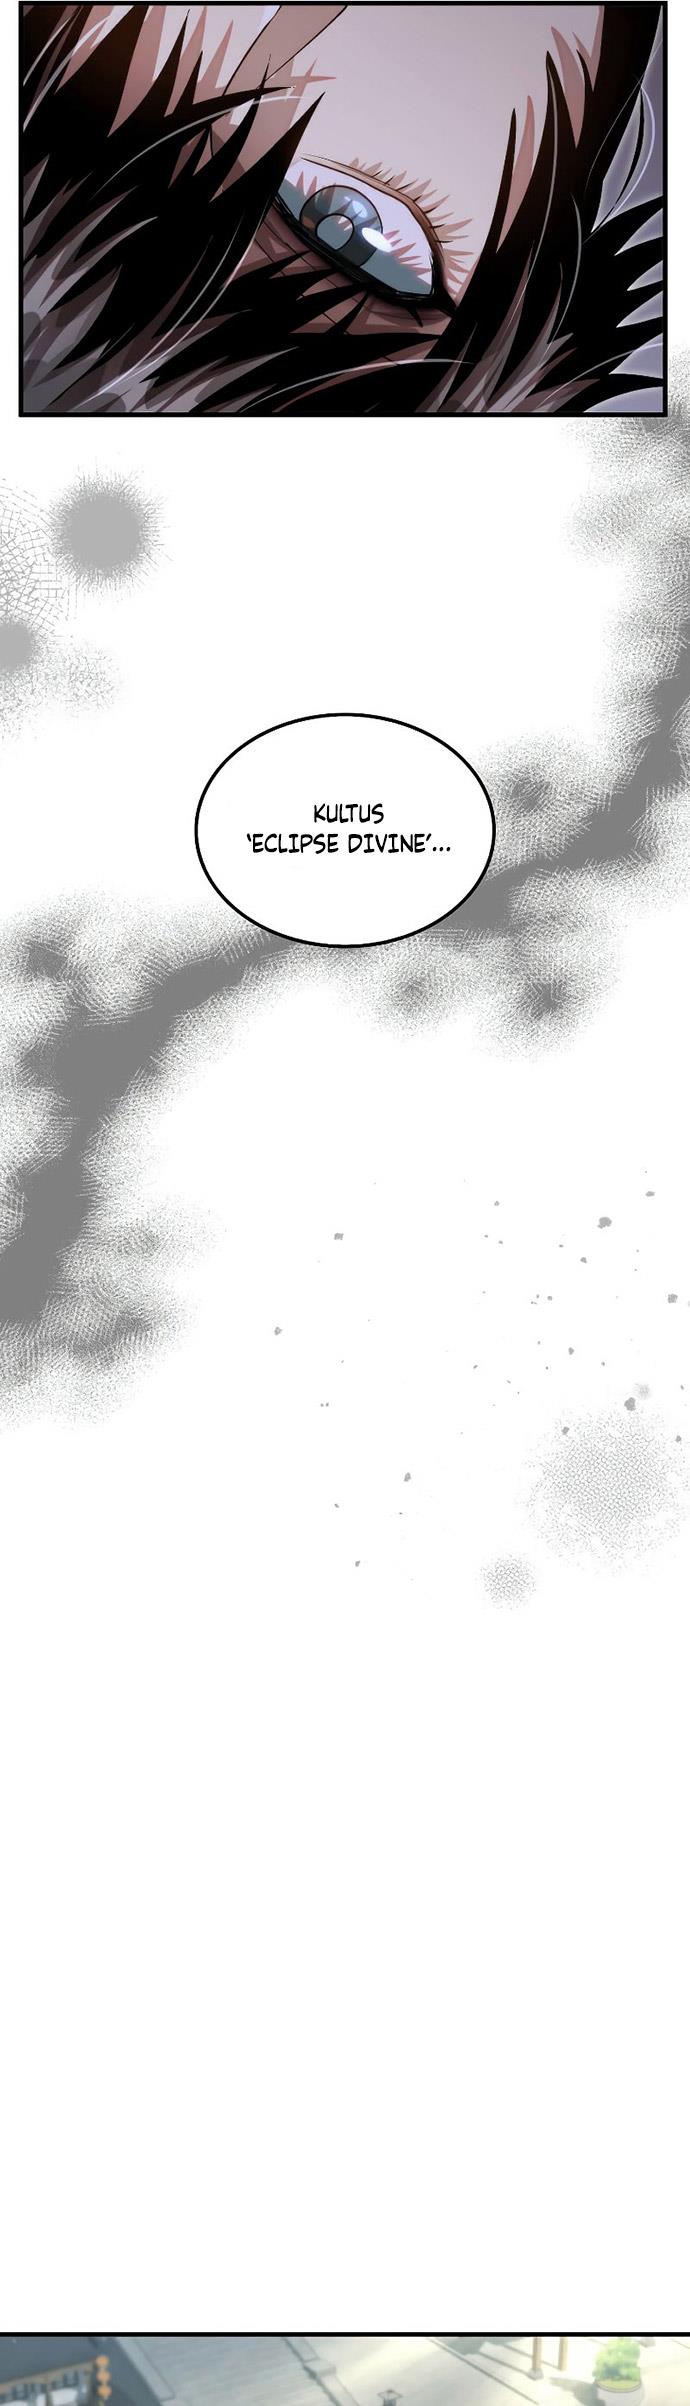 Doctor’s Rebirth Chapter 131